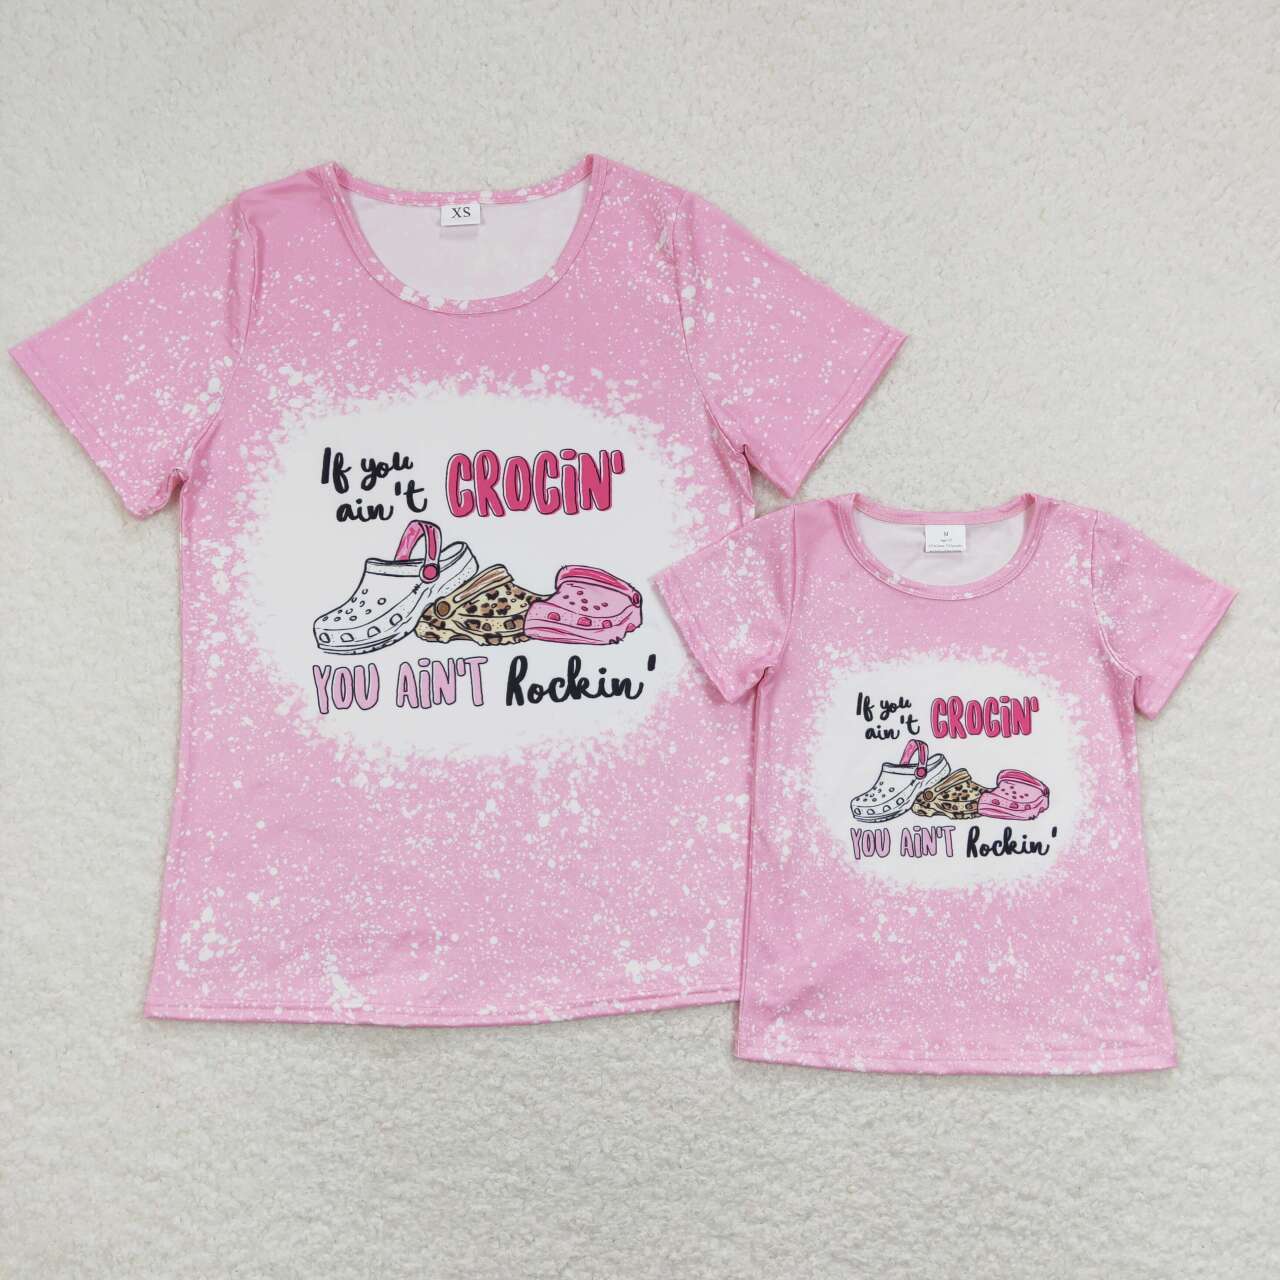 mummy and me summer mathing clothes ripped shoes print summer tshirt top